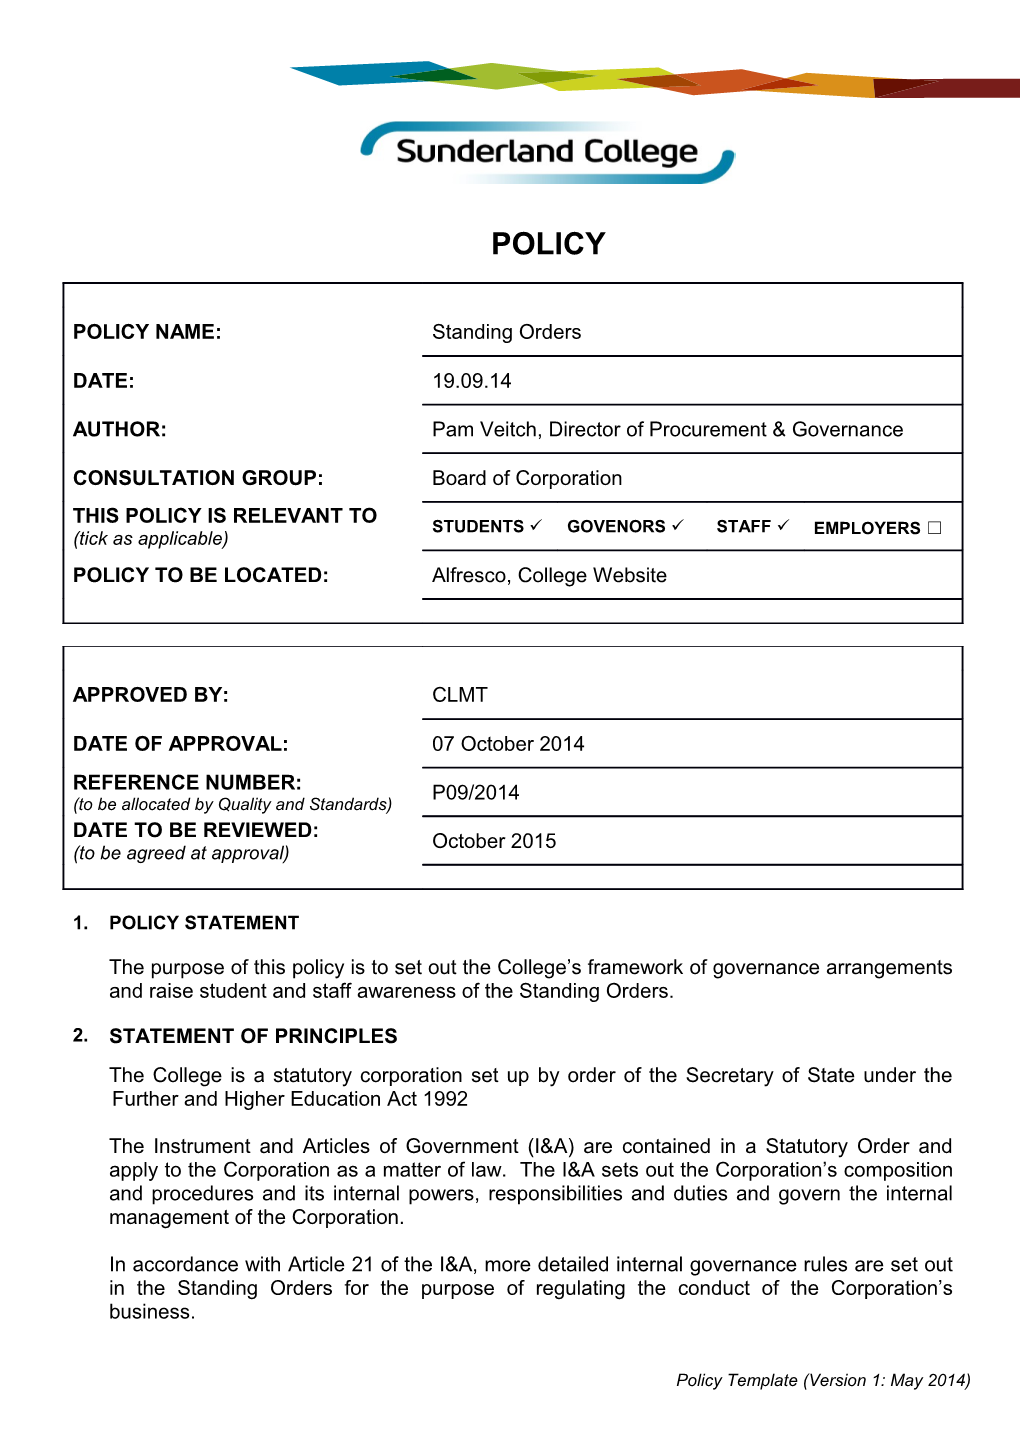 Policy Template (Version 1: May 2014)